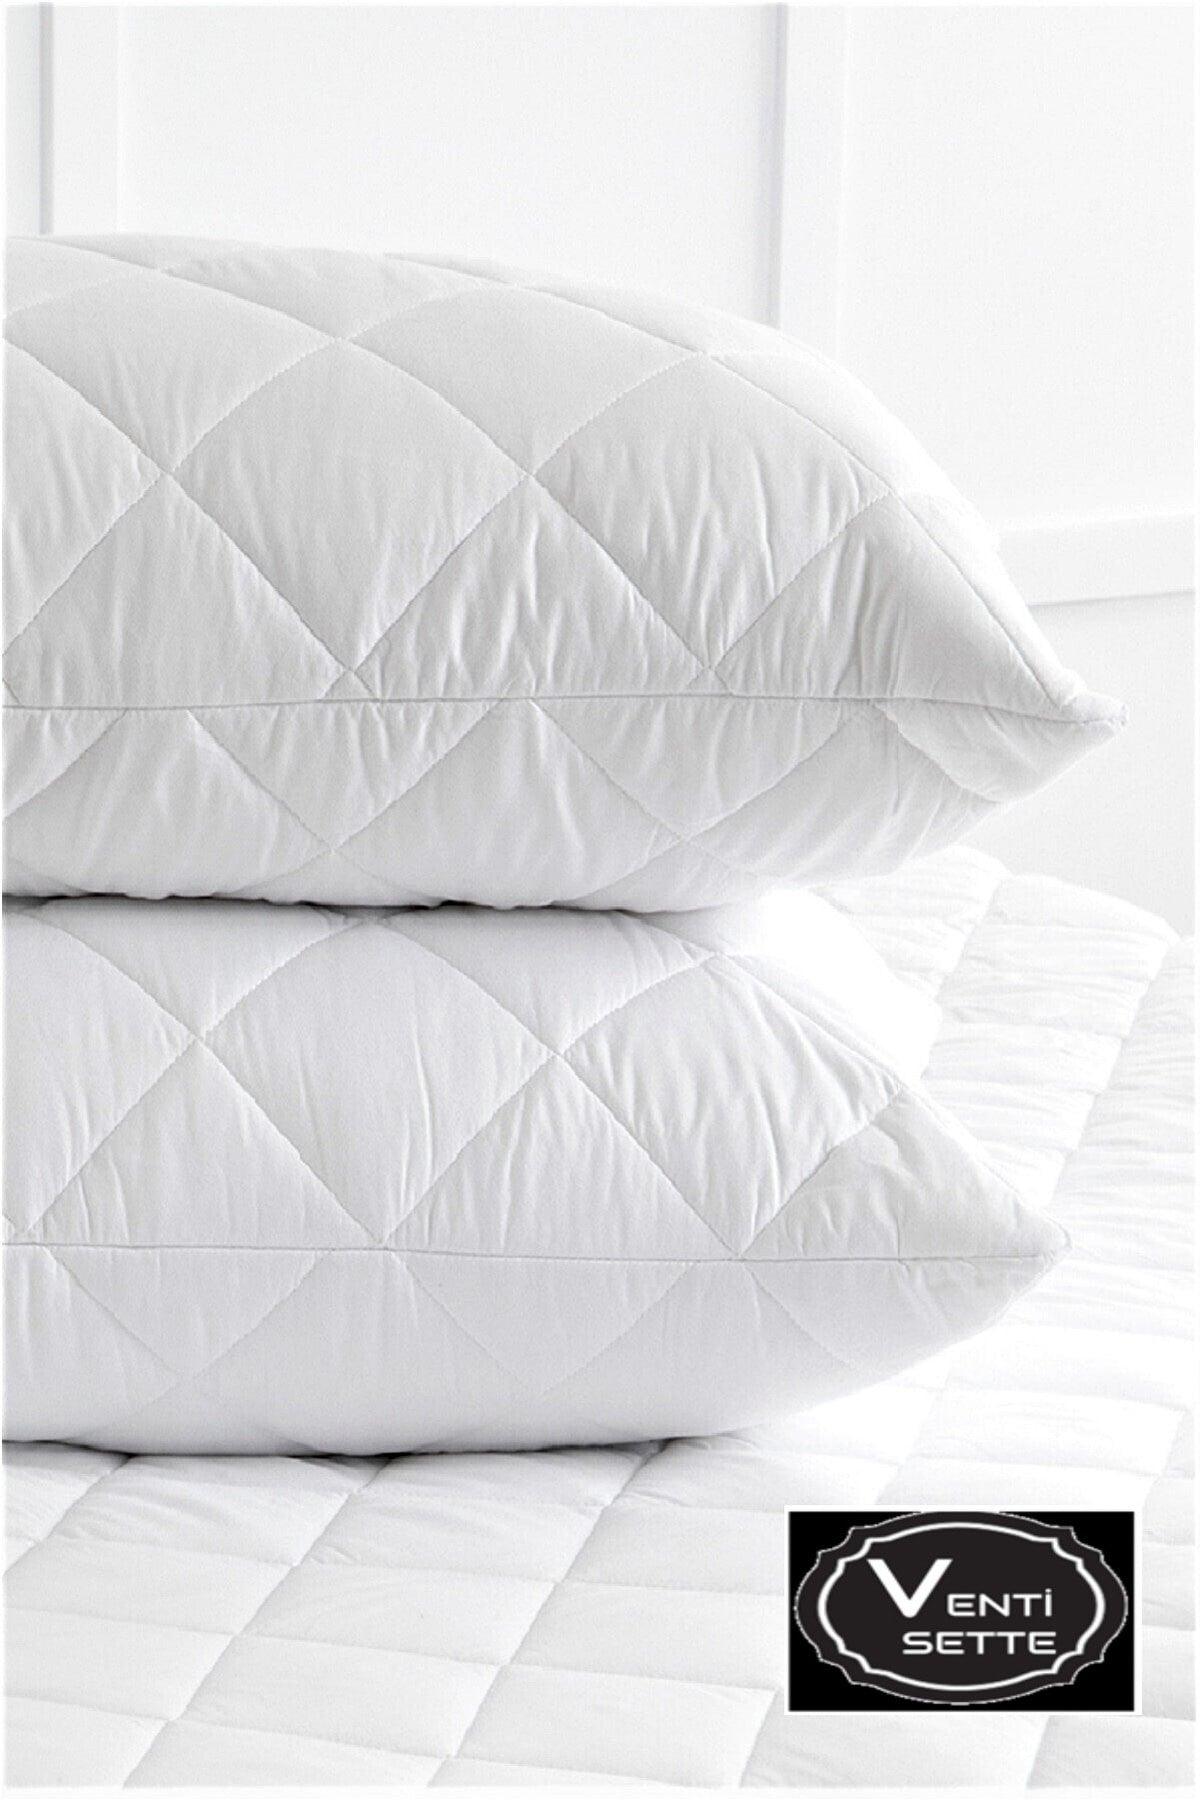 2 Pieces Quilted Zippered White Color Pillow Protector Mattress 50x70 Cm - Swordslife